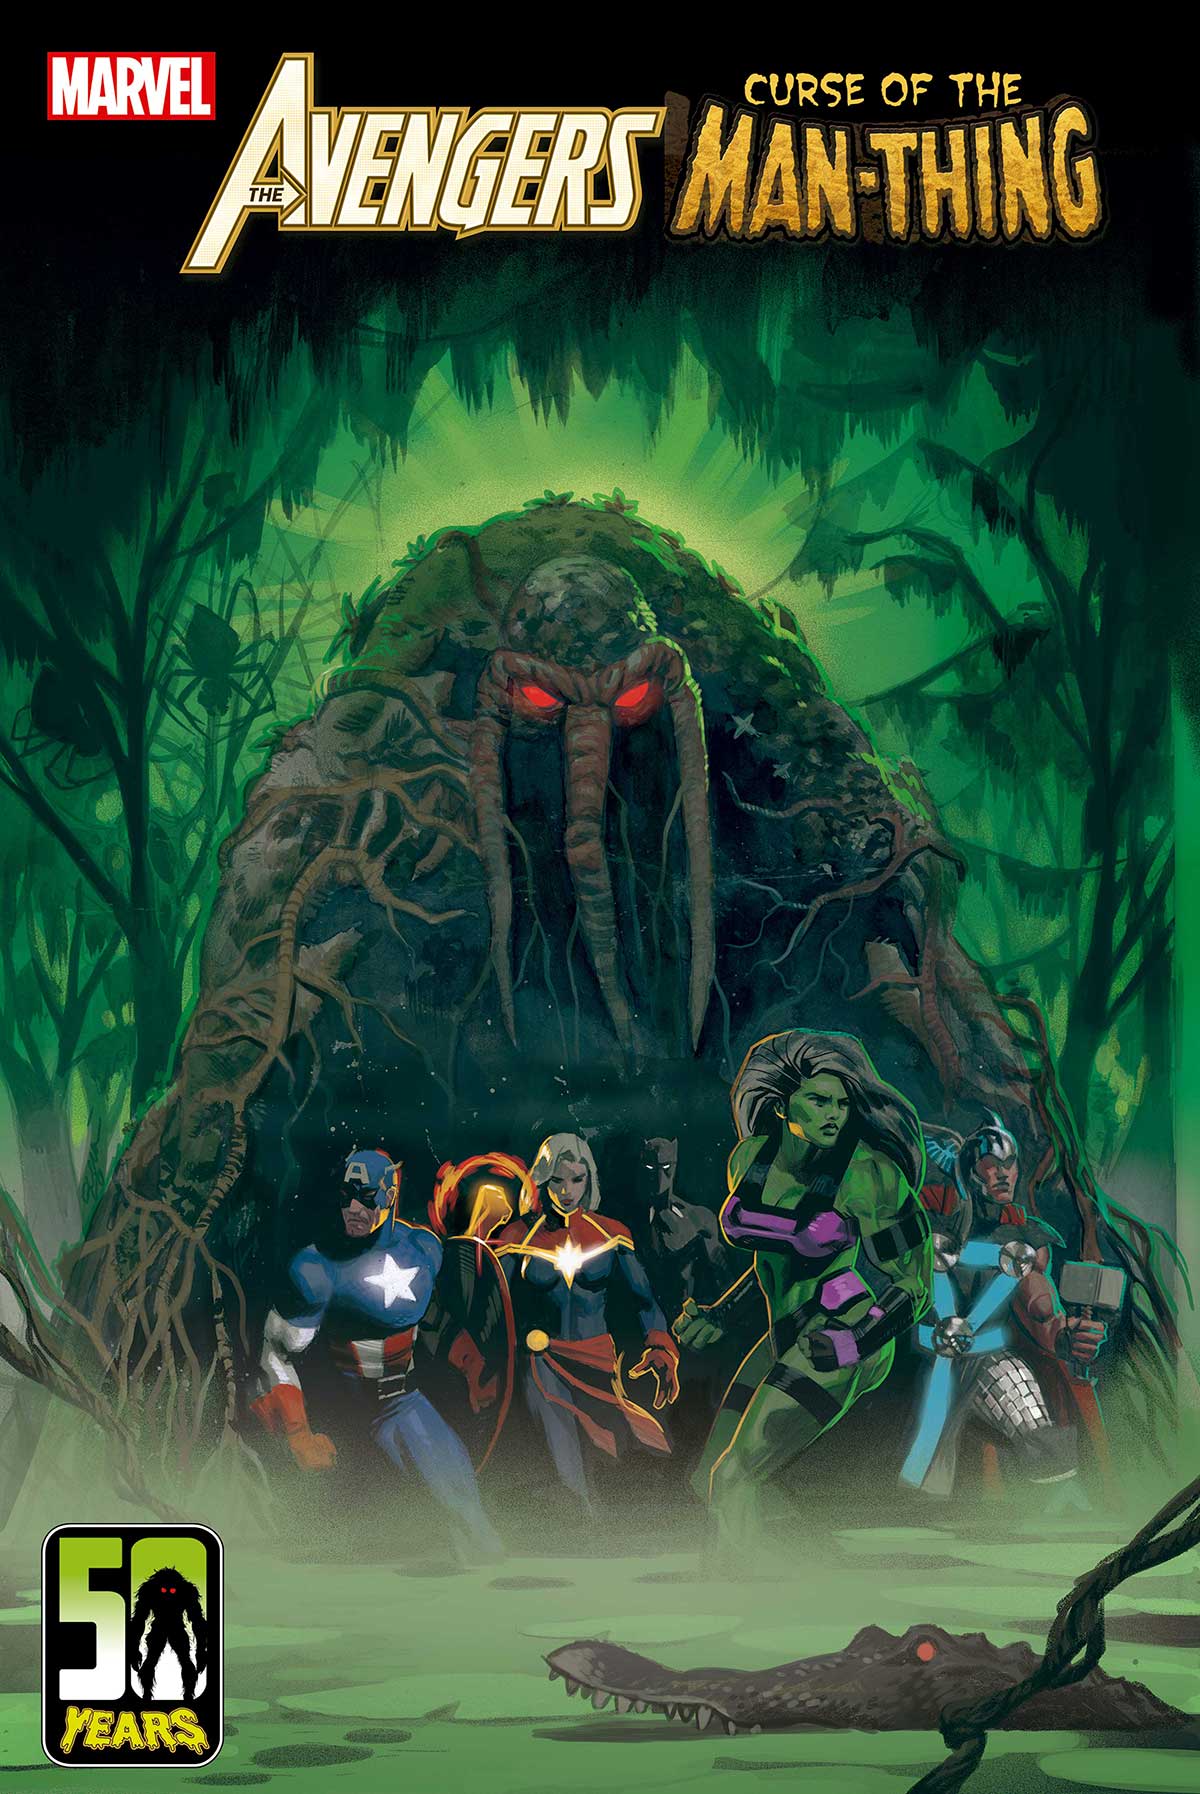 Man-Thing gets new series in 2021 — Major Spoilers — Comic Book Reviews,  News, Previews, and Podcasts